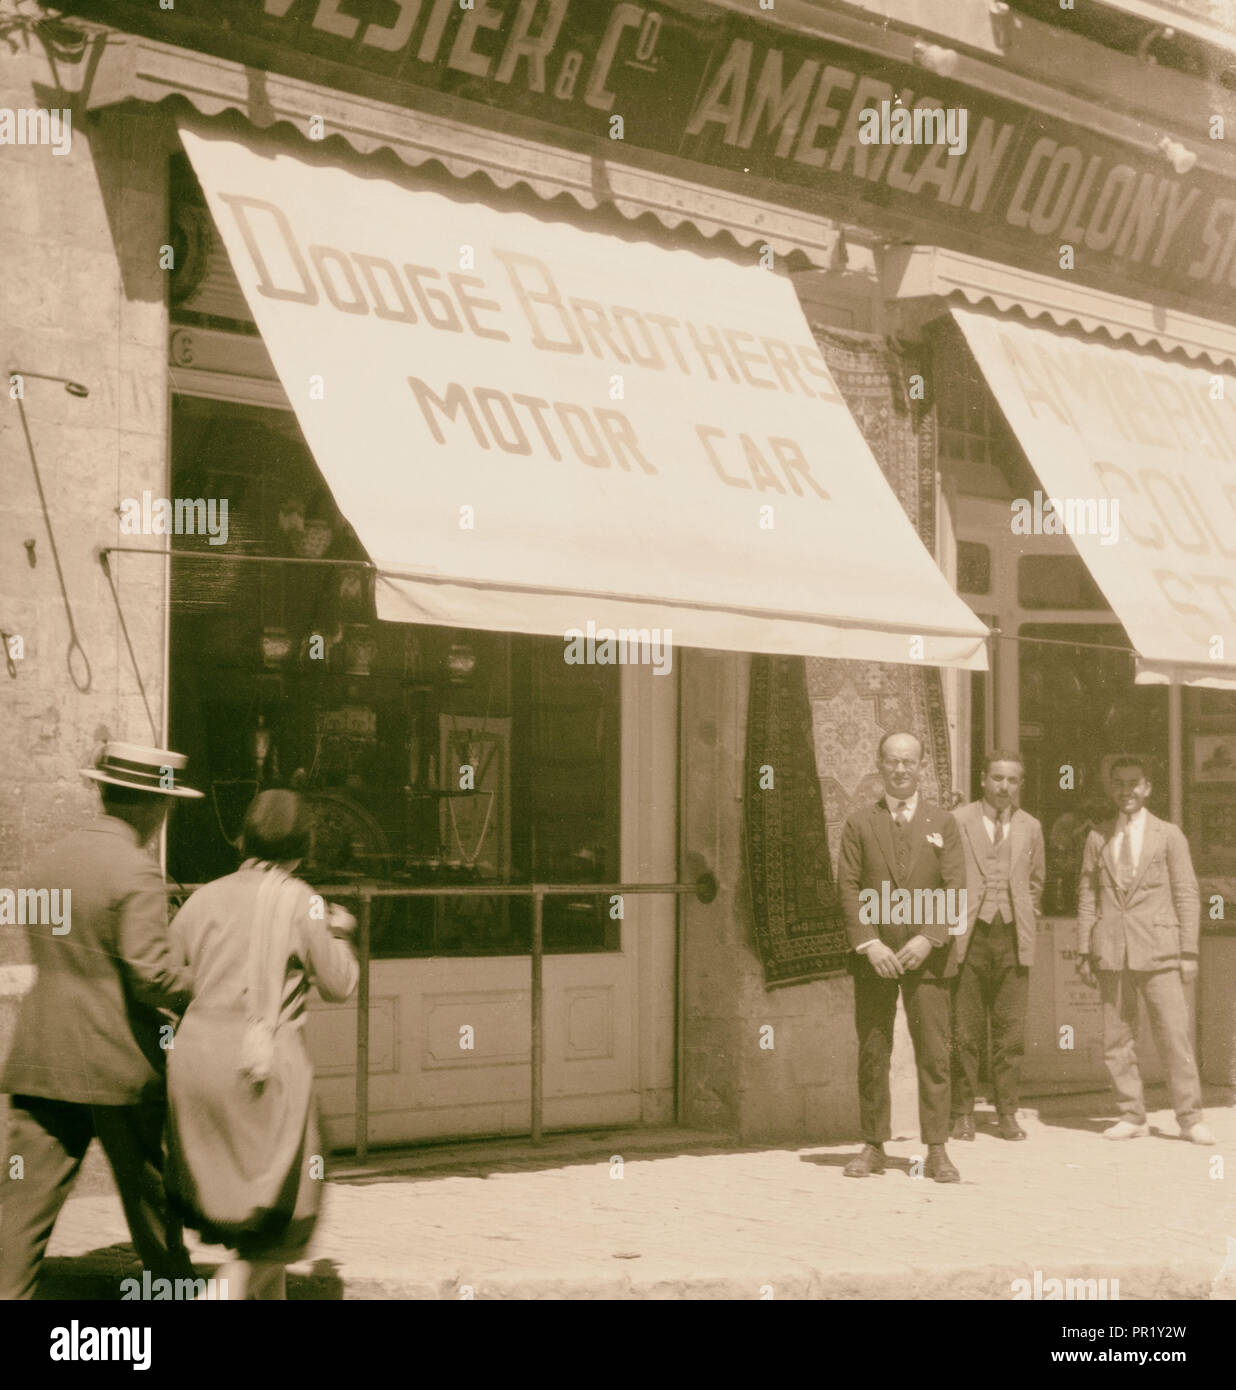 American Colony store front with 'Dodge Brothers Motor Car' awning. 1925, Jerusalem, Israel Stock Photo